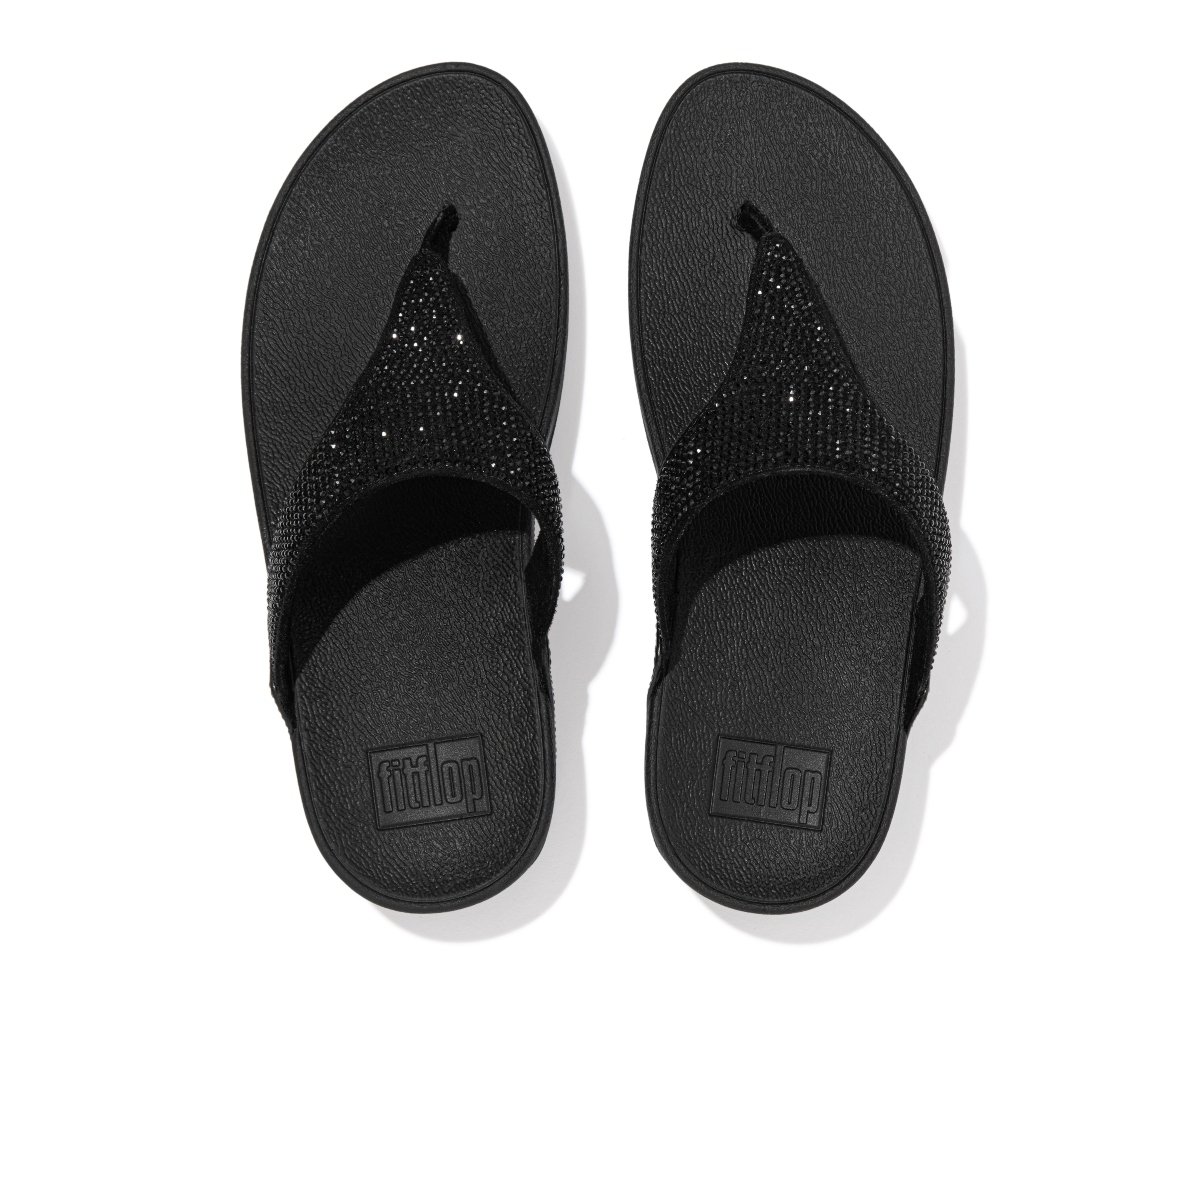 FitFlop LULU Crystal Embellished Toe-Post Sandals All Black top view